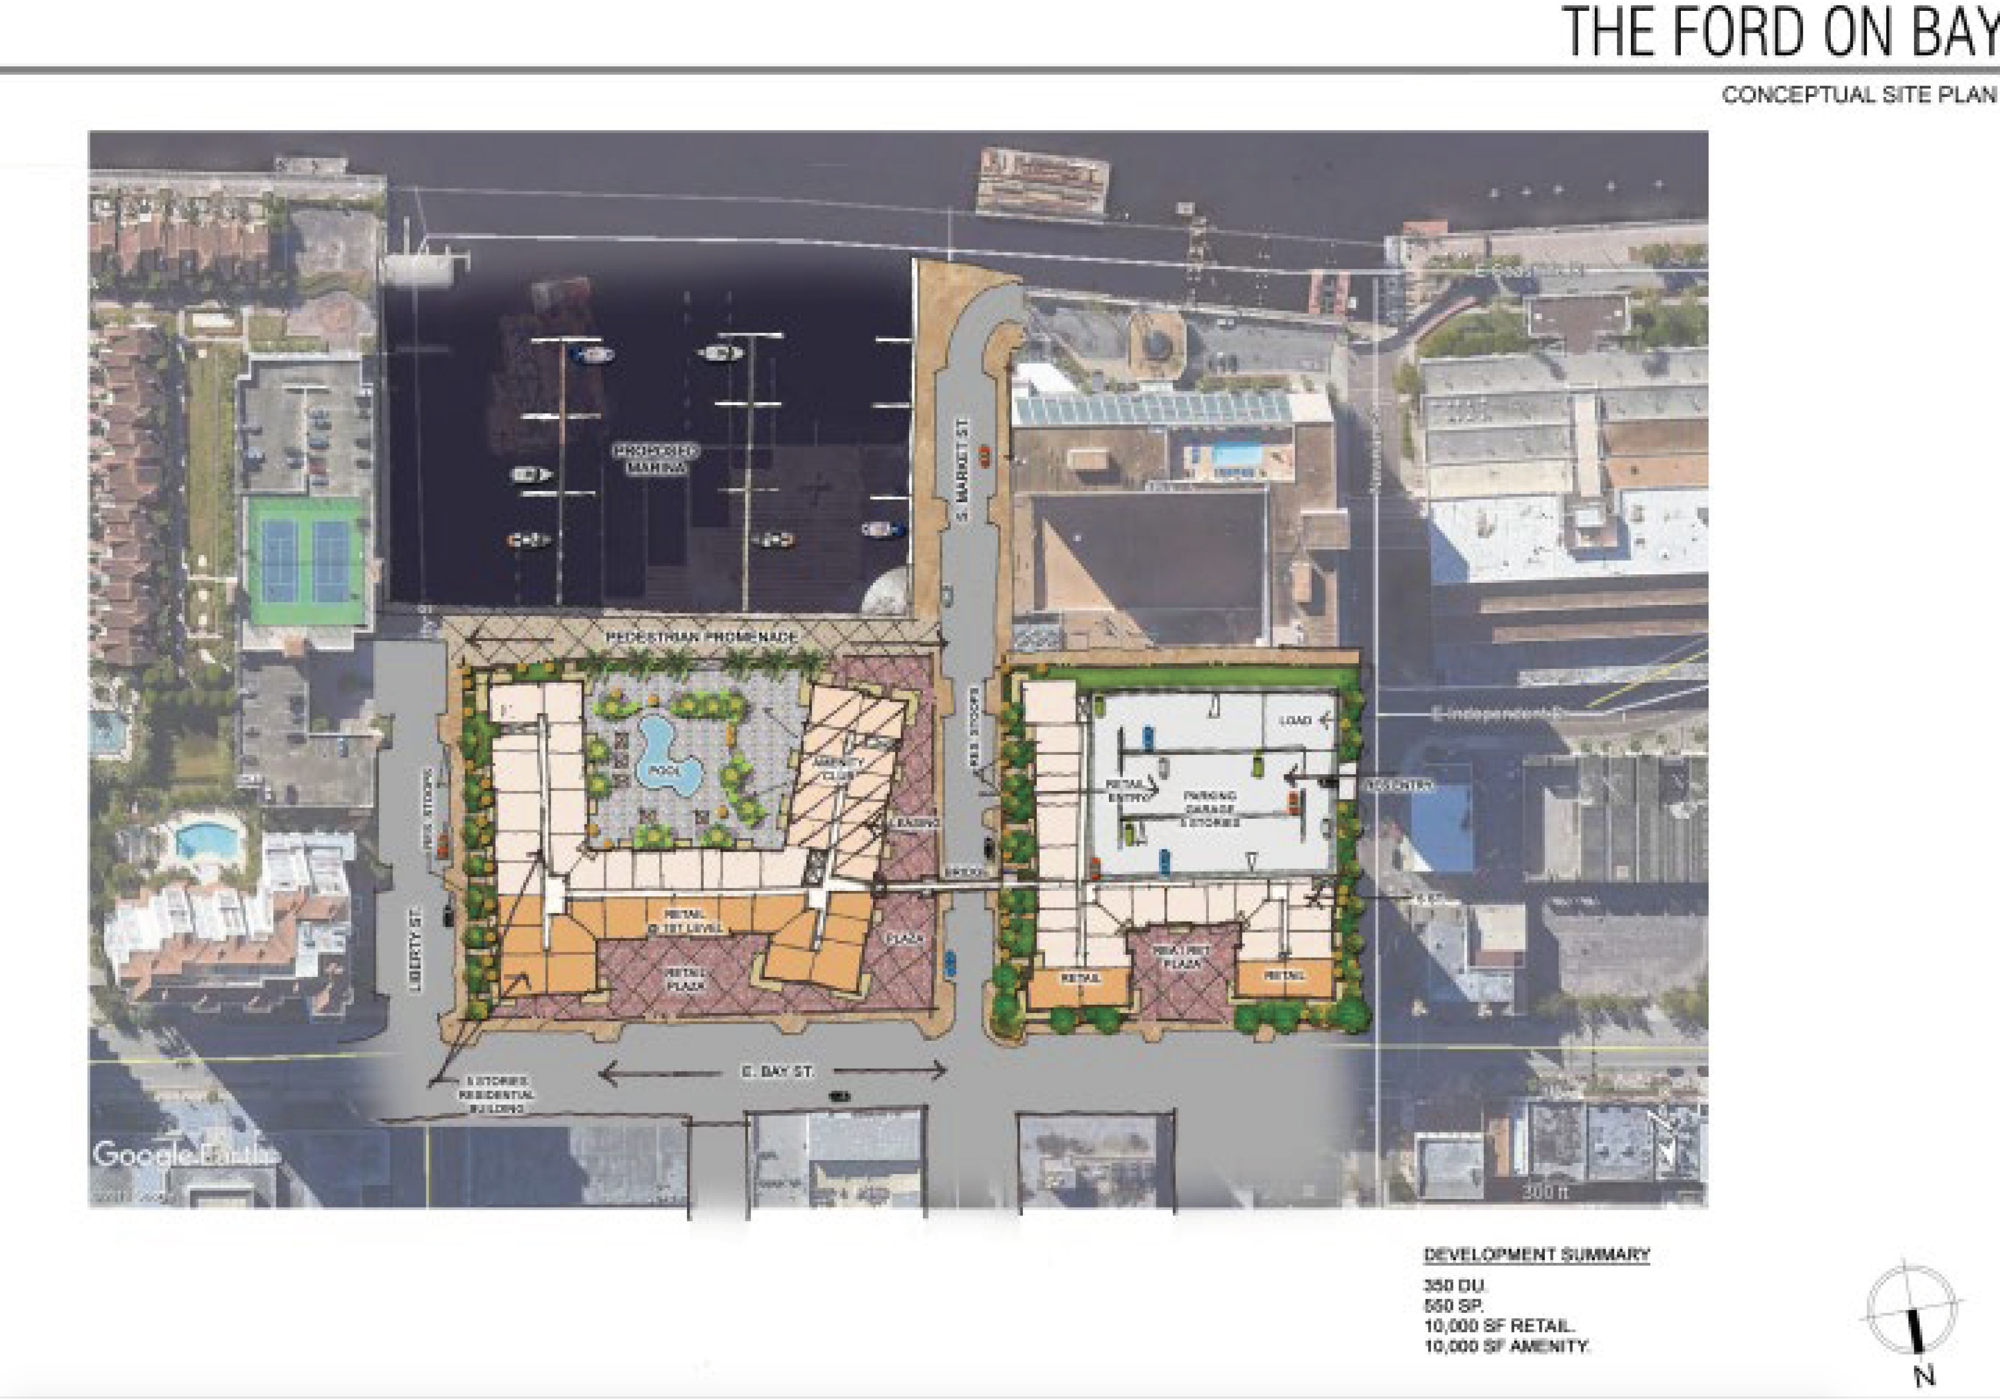 The Related Group of Miami showed this conceptual site plan of The Ford on Bay site.